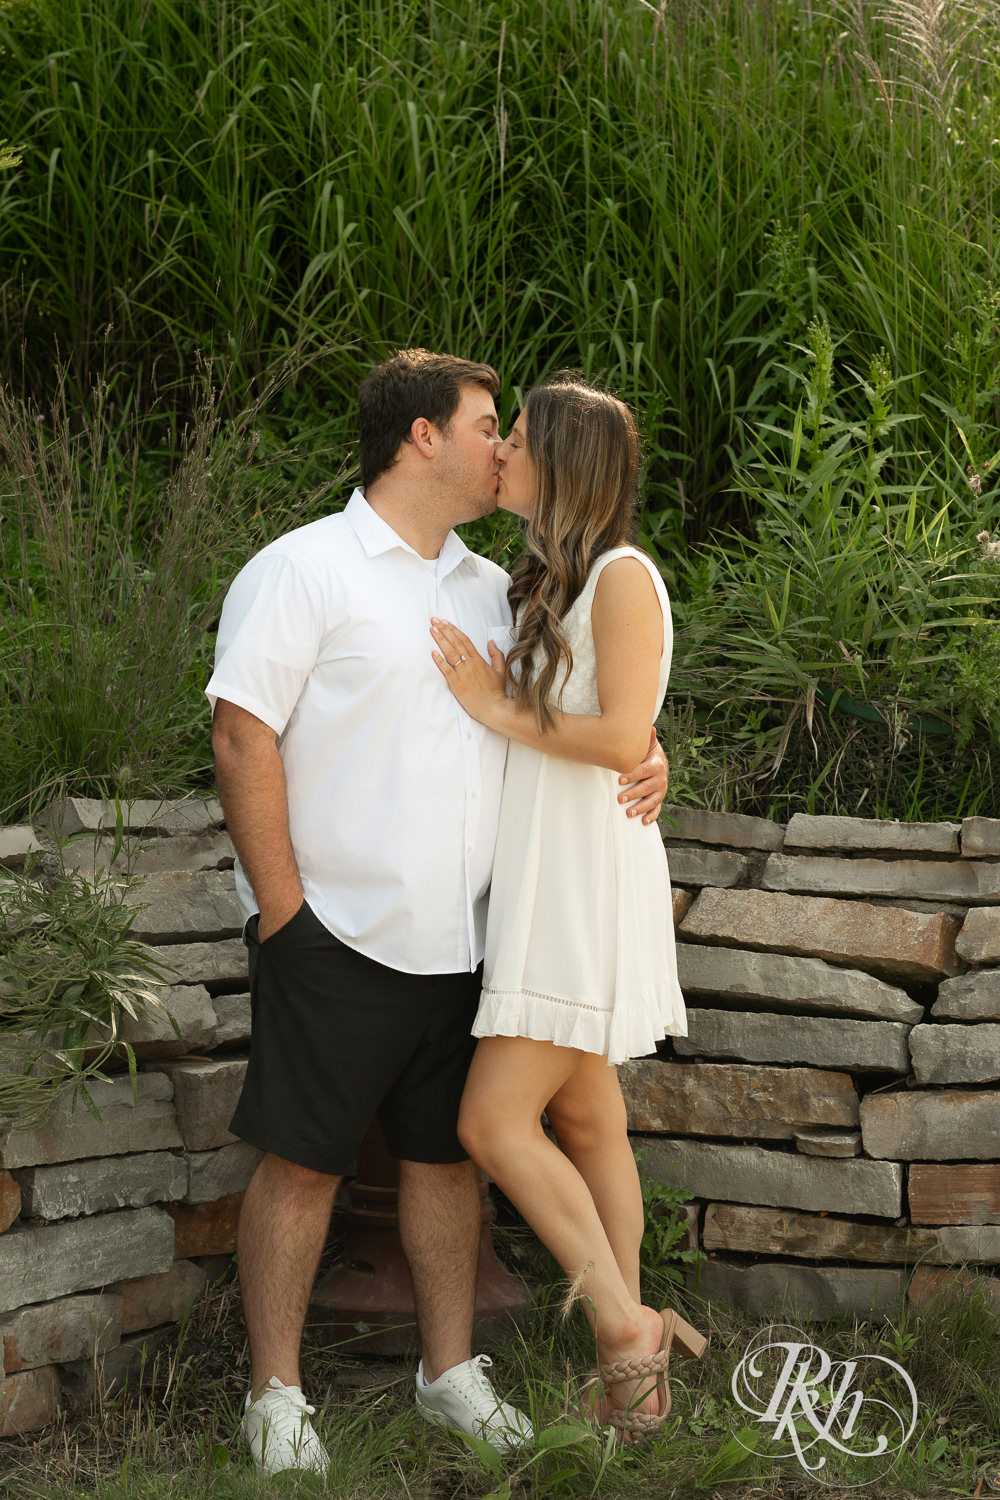 Man and woman in white dress kiss during engagement photography at Centennial Lakes Park in Edina, Minnesota.